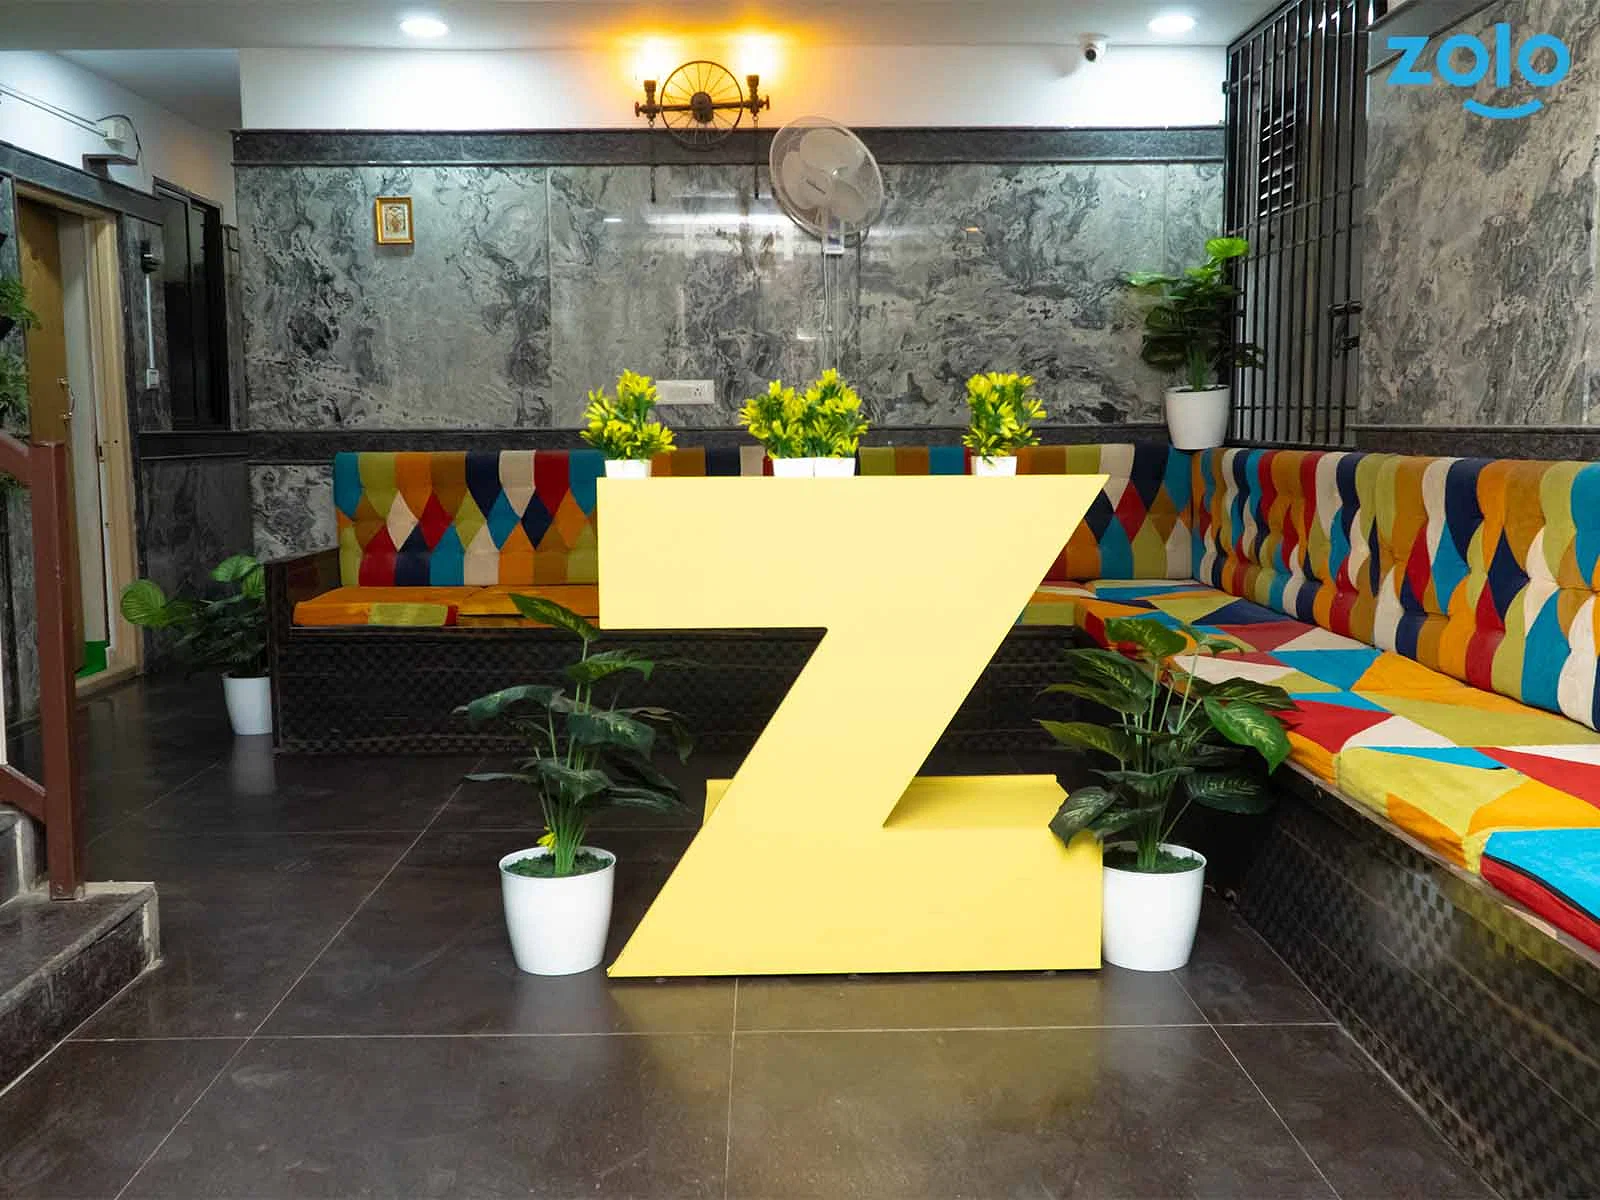 budget-friendly PGs and hostels for couple with single rooms with daily hopusekeeping-Zolo Highstreet B